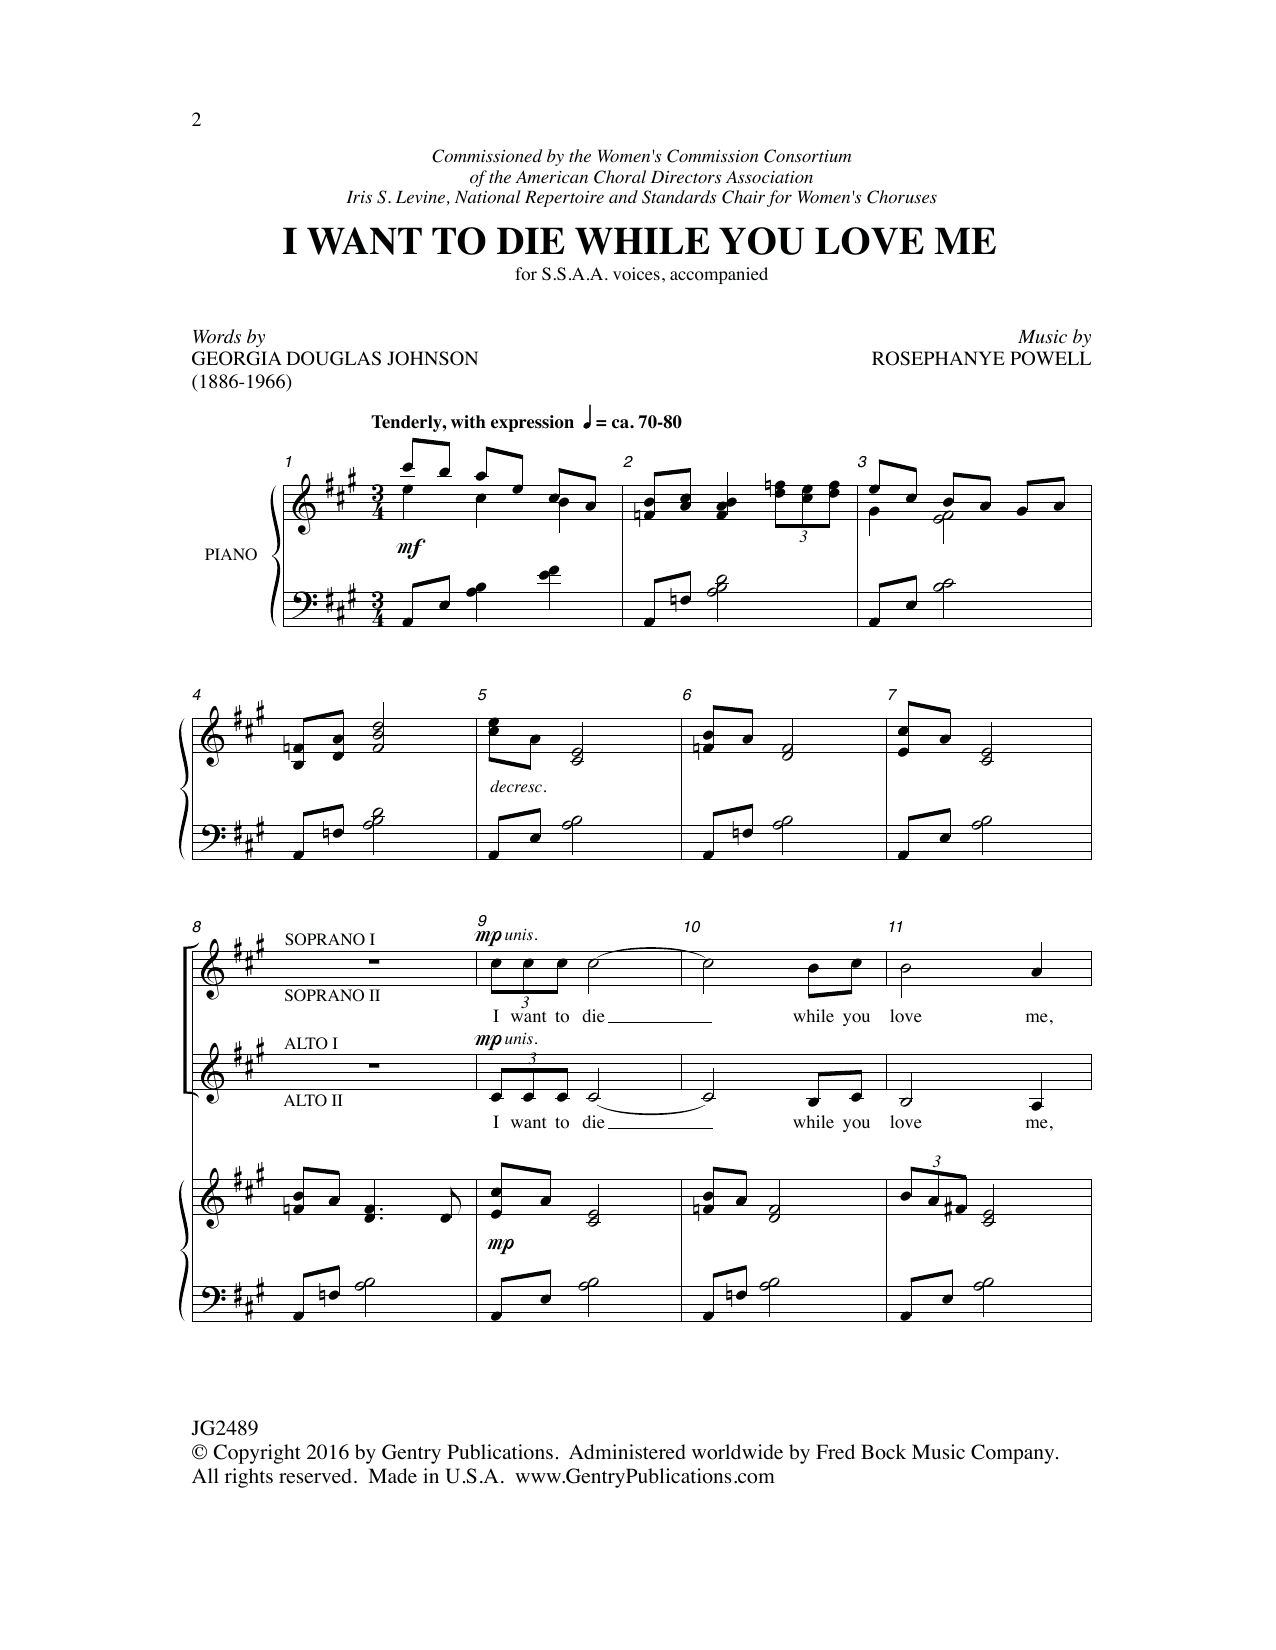 Download Georgia Douglas Johnson I Want to Die While You Love Me Sheet Music